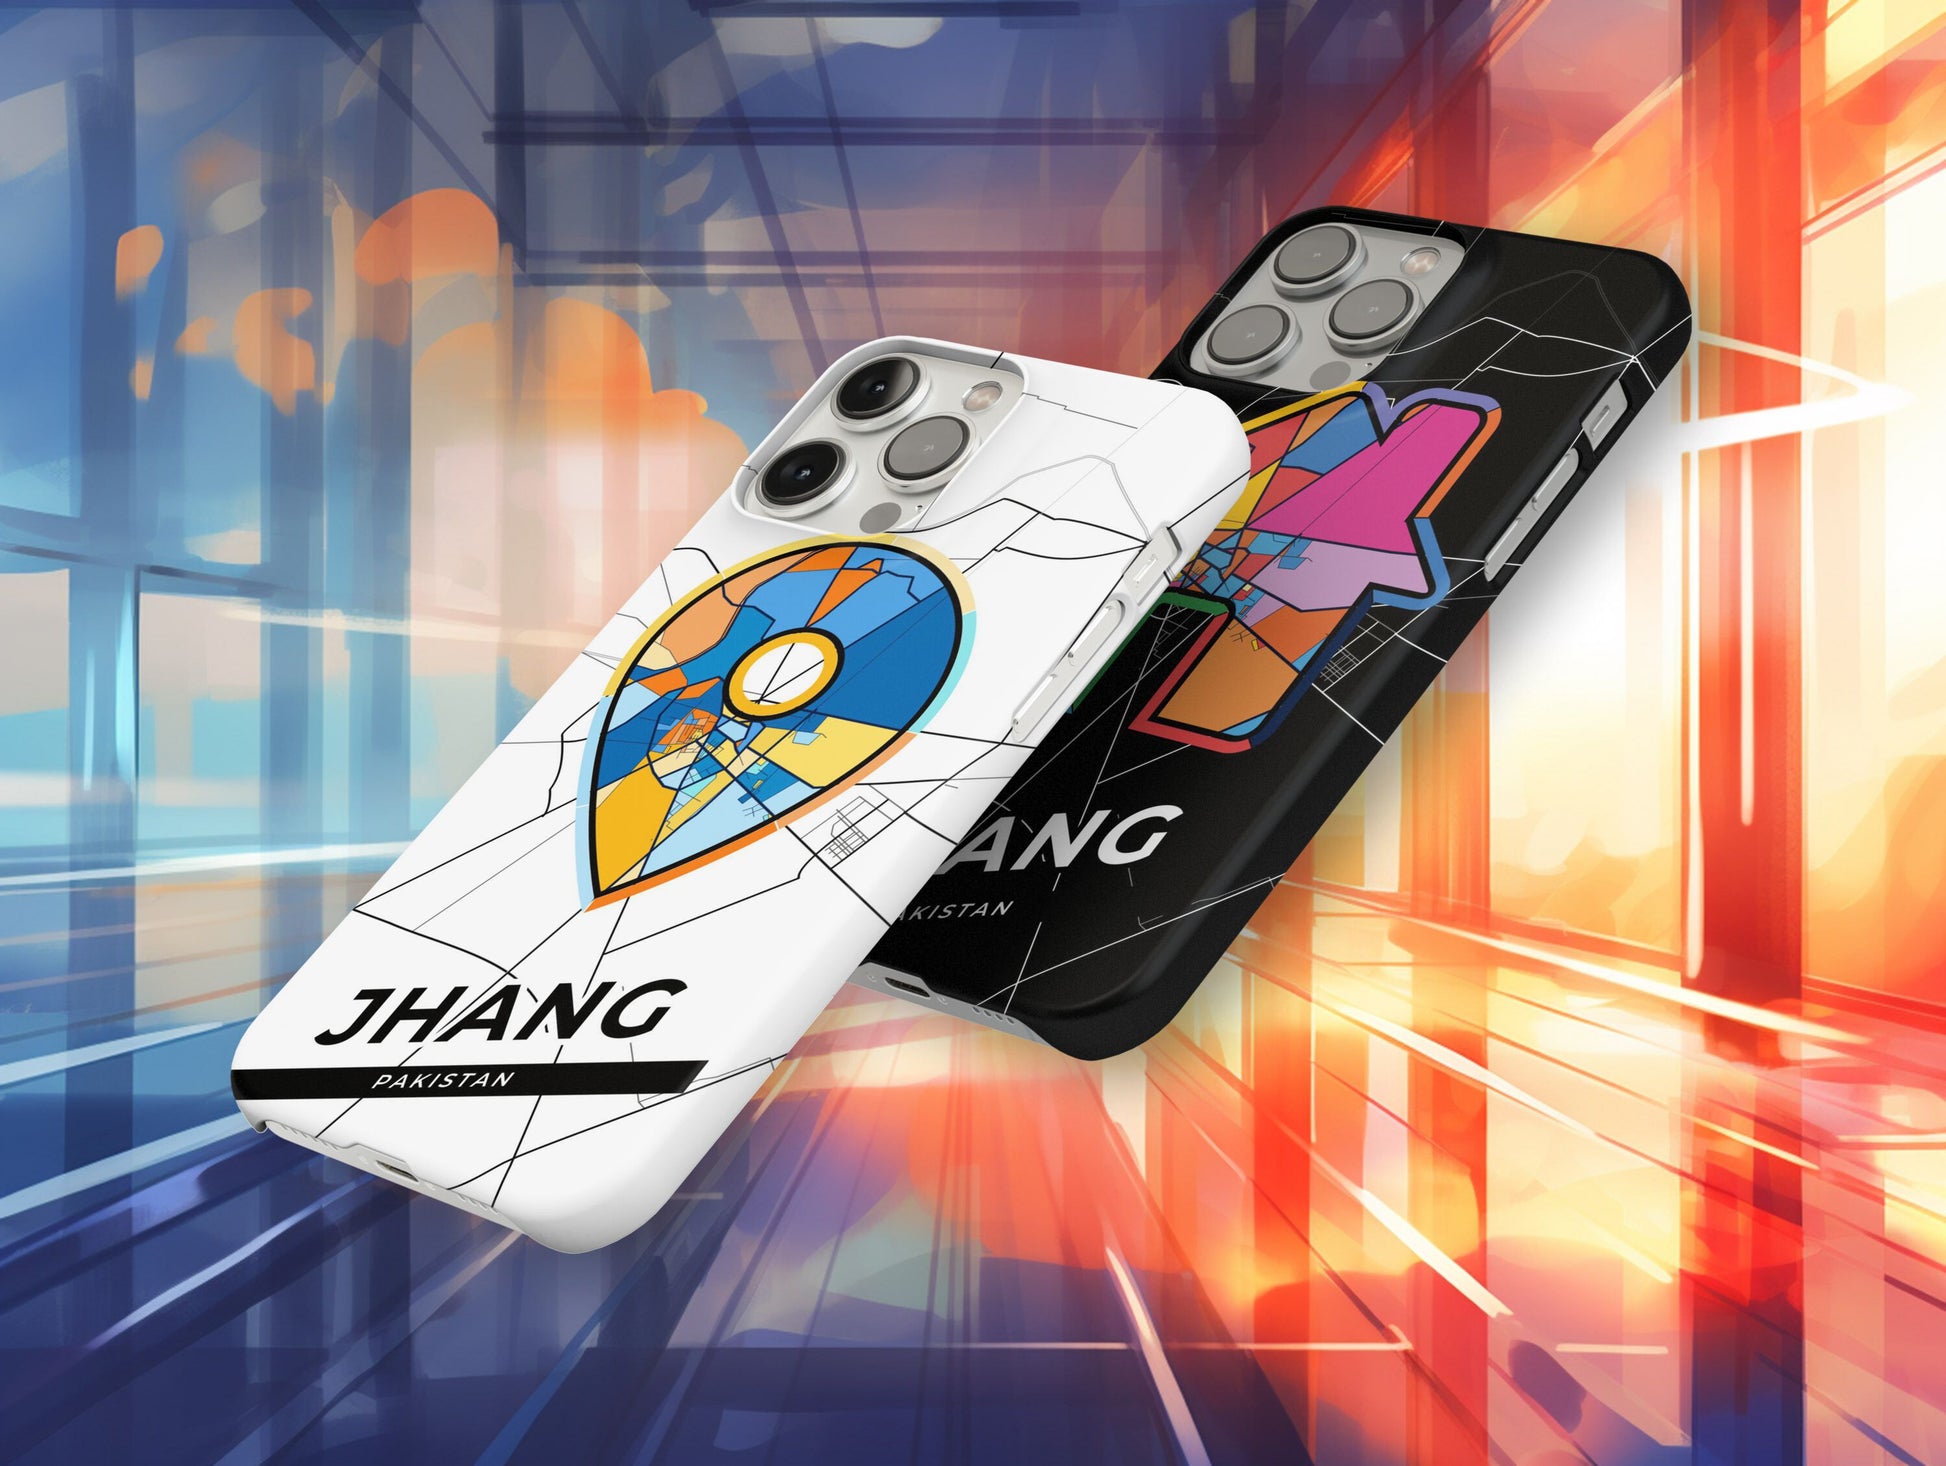 Jhang Pakistan slim phone case with colorful icon. Birthday, wedding or housewarming gift. Couple match cases.